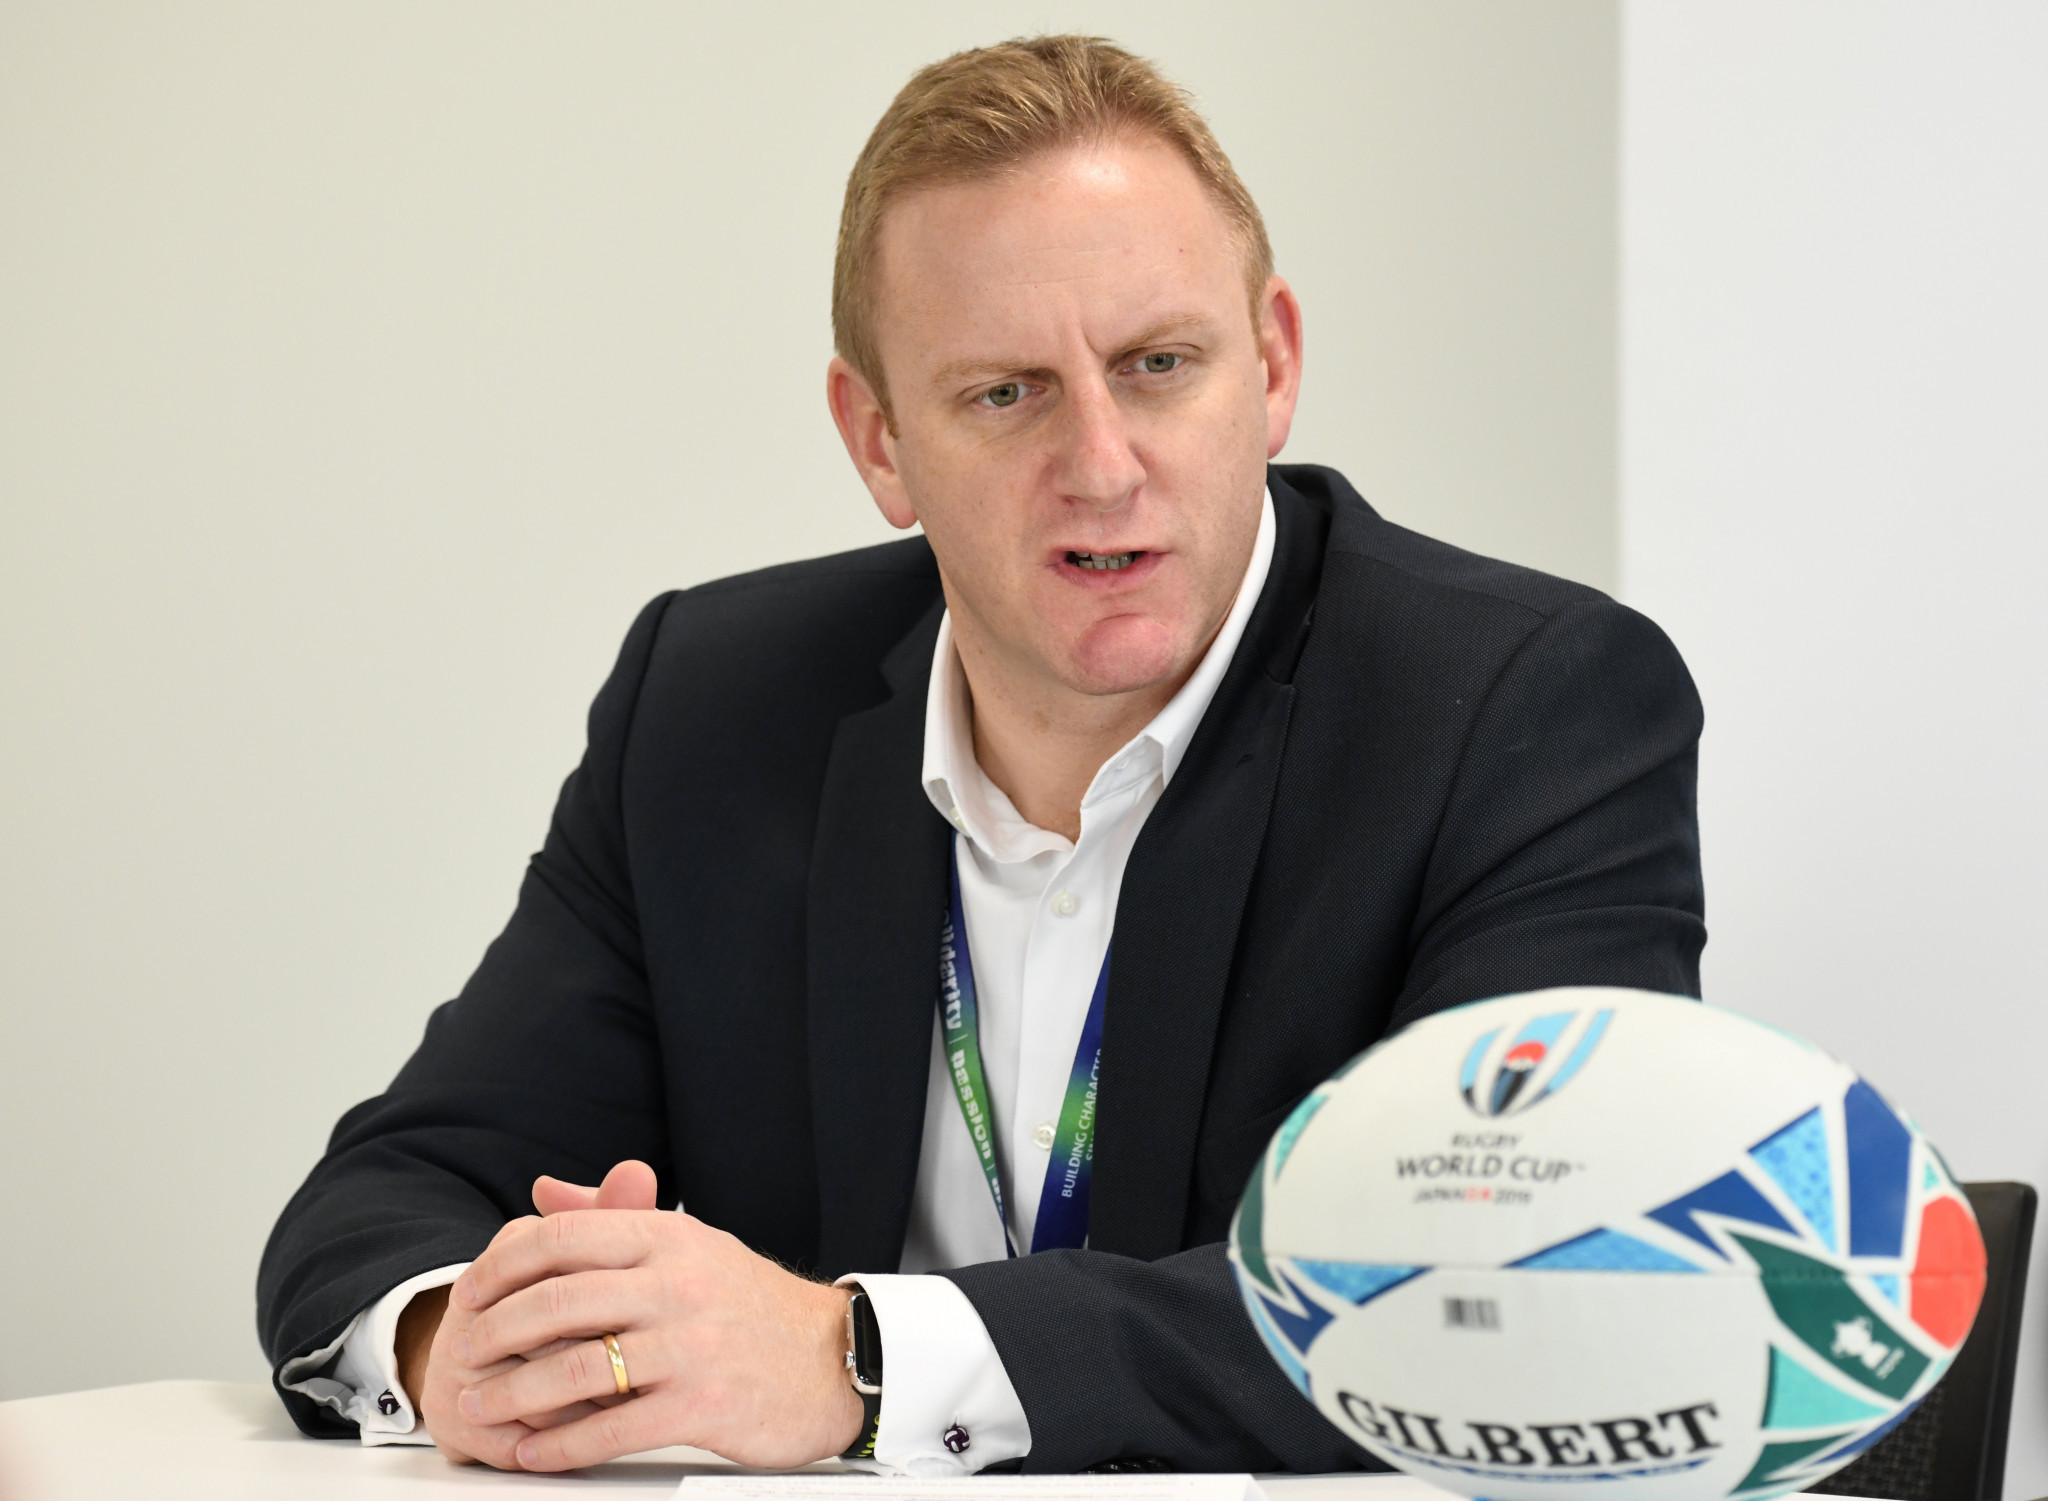 Tournament director of the 2019 Rugby World Cup, Alan Gilpin, commended the organising committee of the tournament for the progress they have made this year ©Getty Images